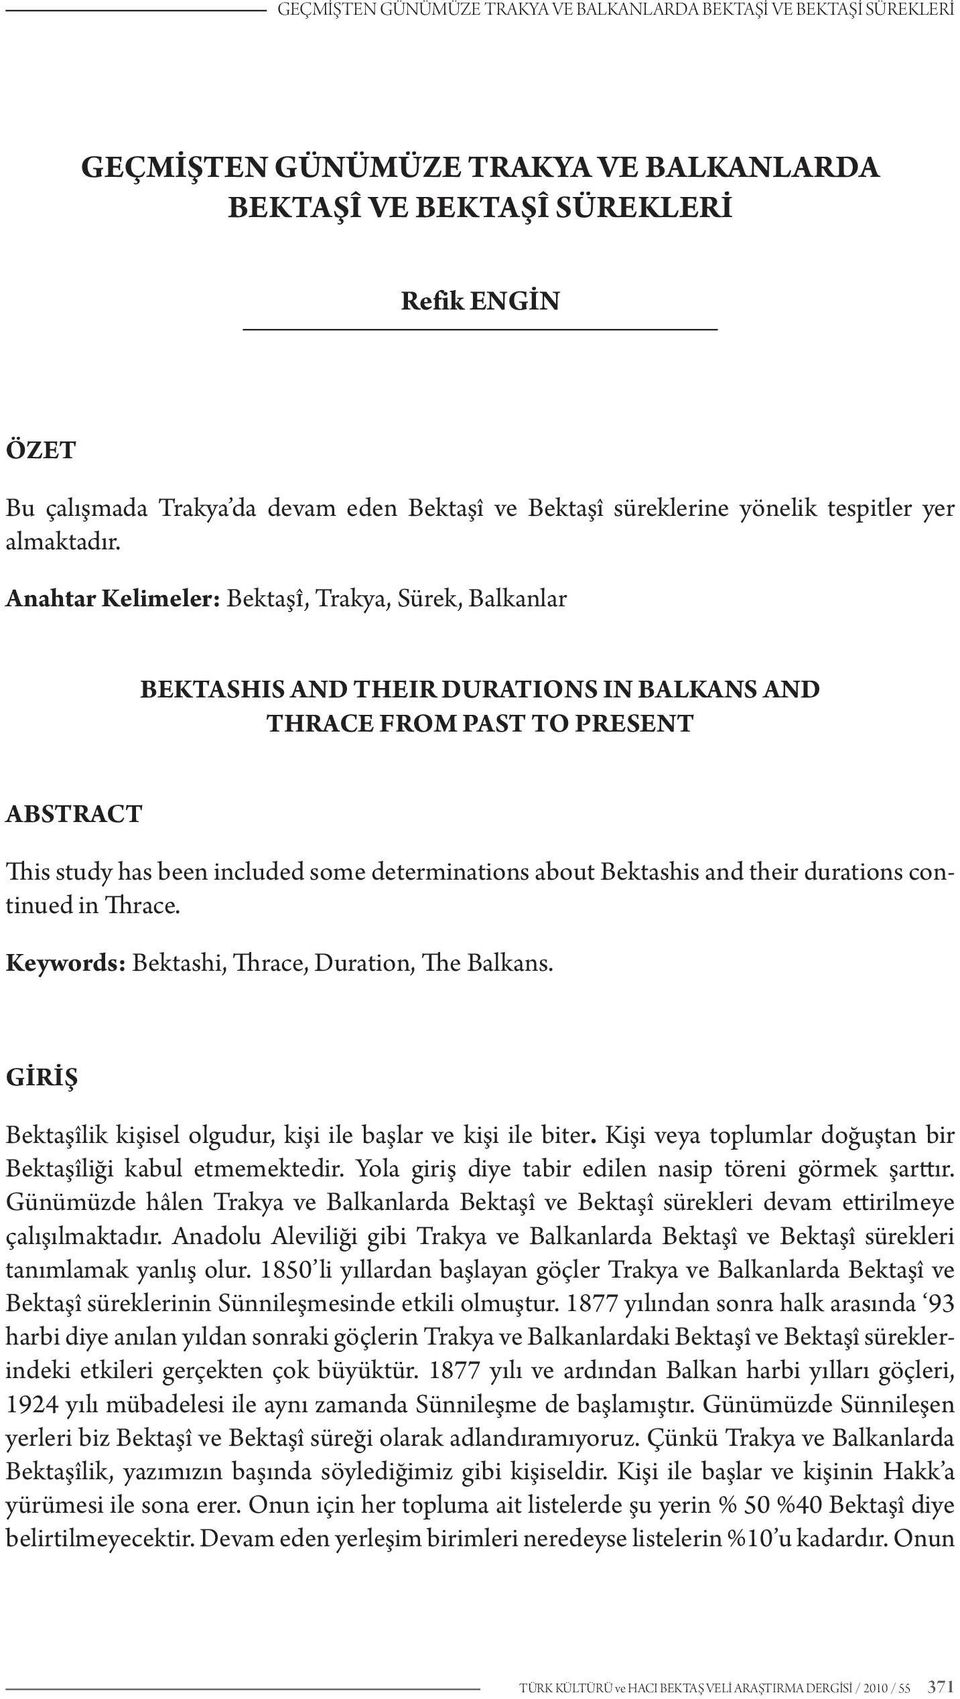 Anahtar Kelimeler: BektaşÎ, Trakya, Sürek, Balkanlar BEKTASHIS AND THEIR DURATIONS IN BALKANS AND THRACE FROM PAST TO PRESENT ABSTRACT This study has been included some determinations about Bektashis